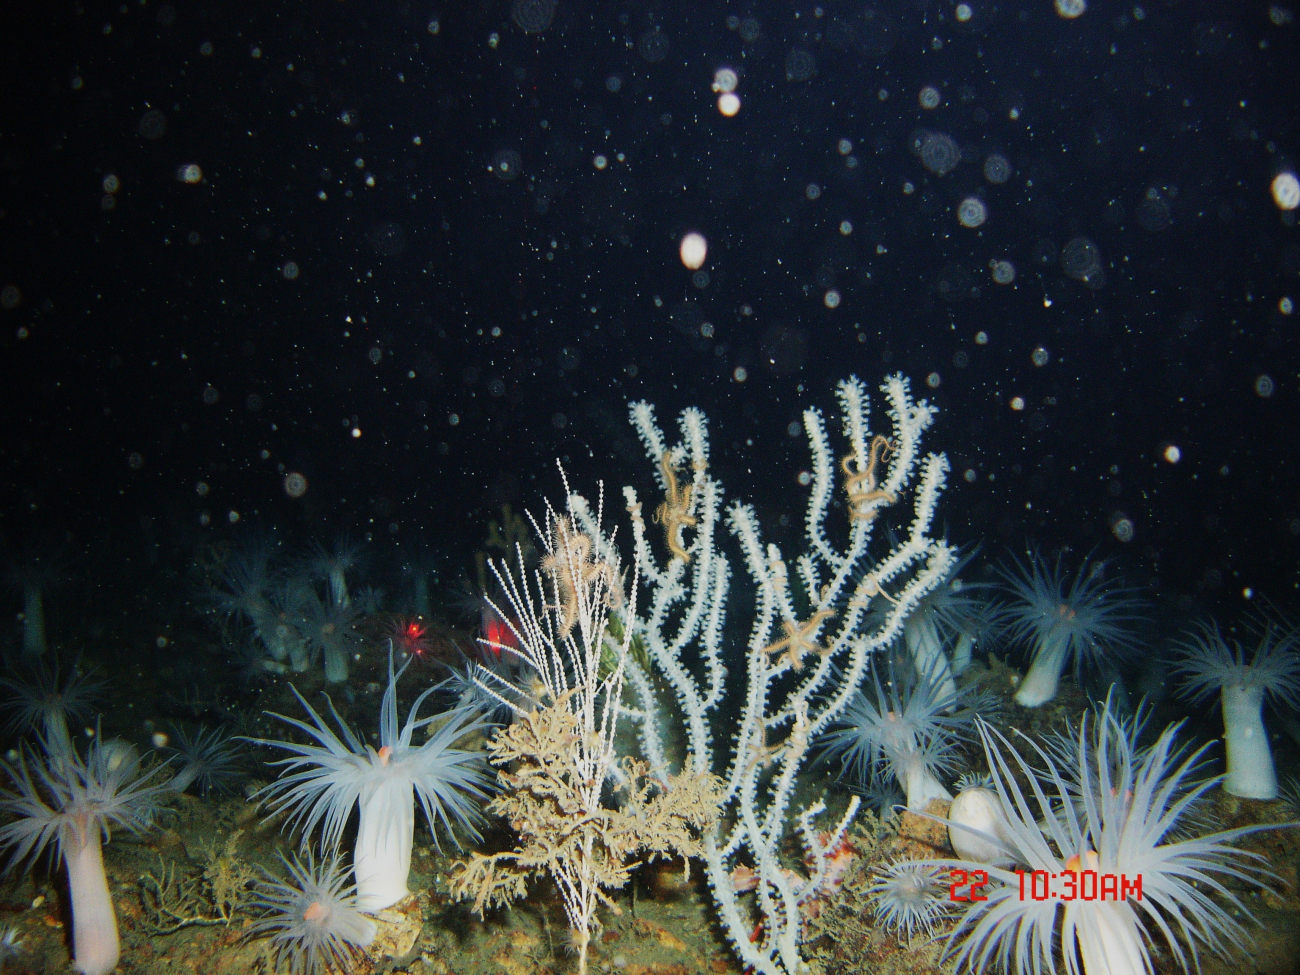 A garden of large white anemones with orange mouths and a white bamboocoral with fairly robust brittle stars